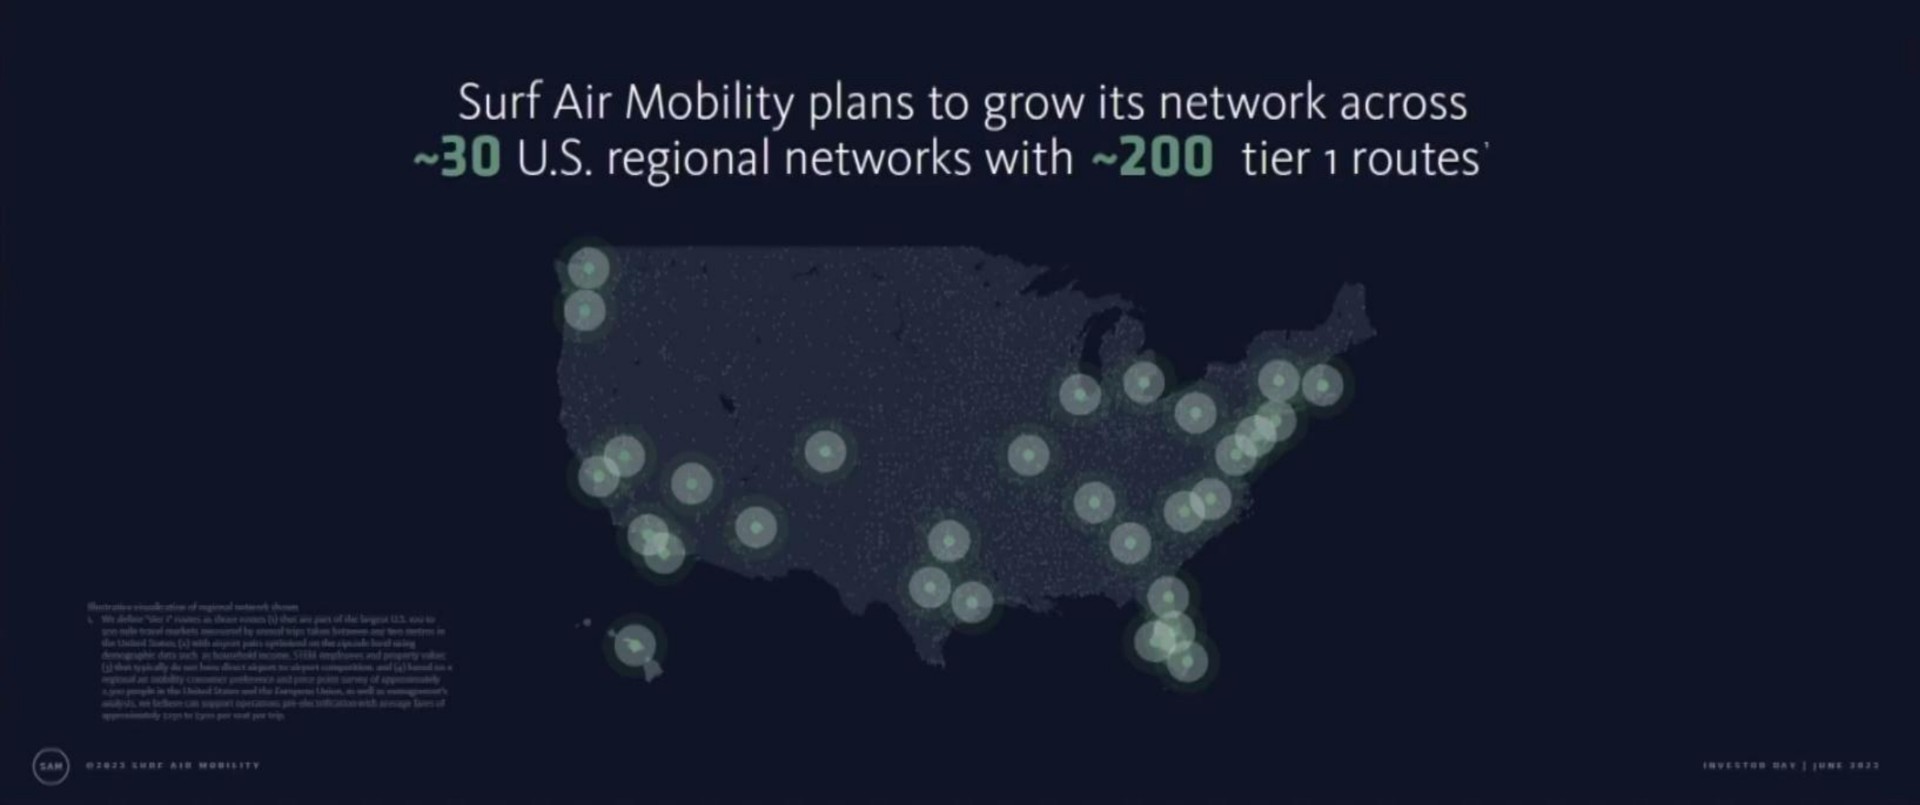 surf air mobility plans to grow its network across regional networks with tier routes a a a | Surf Air